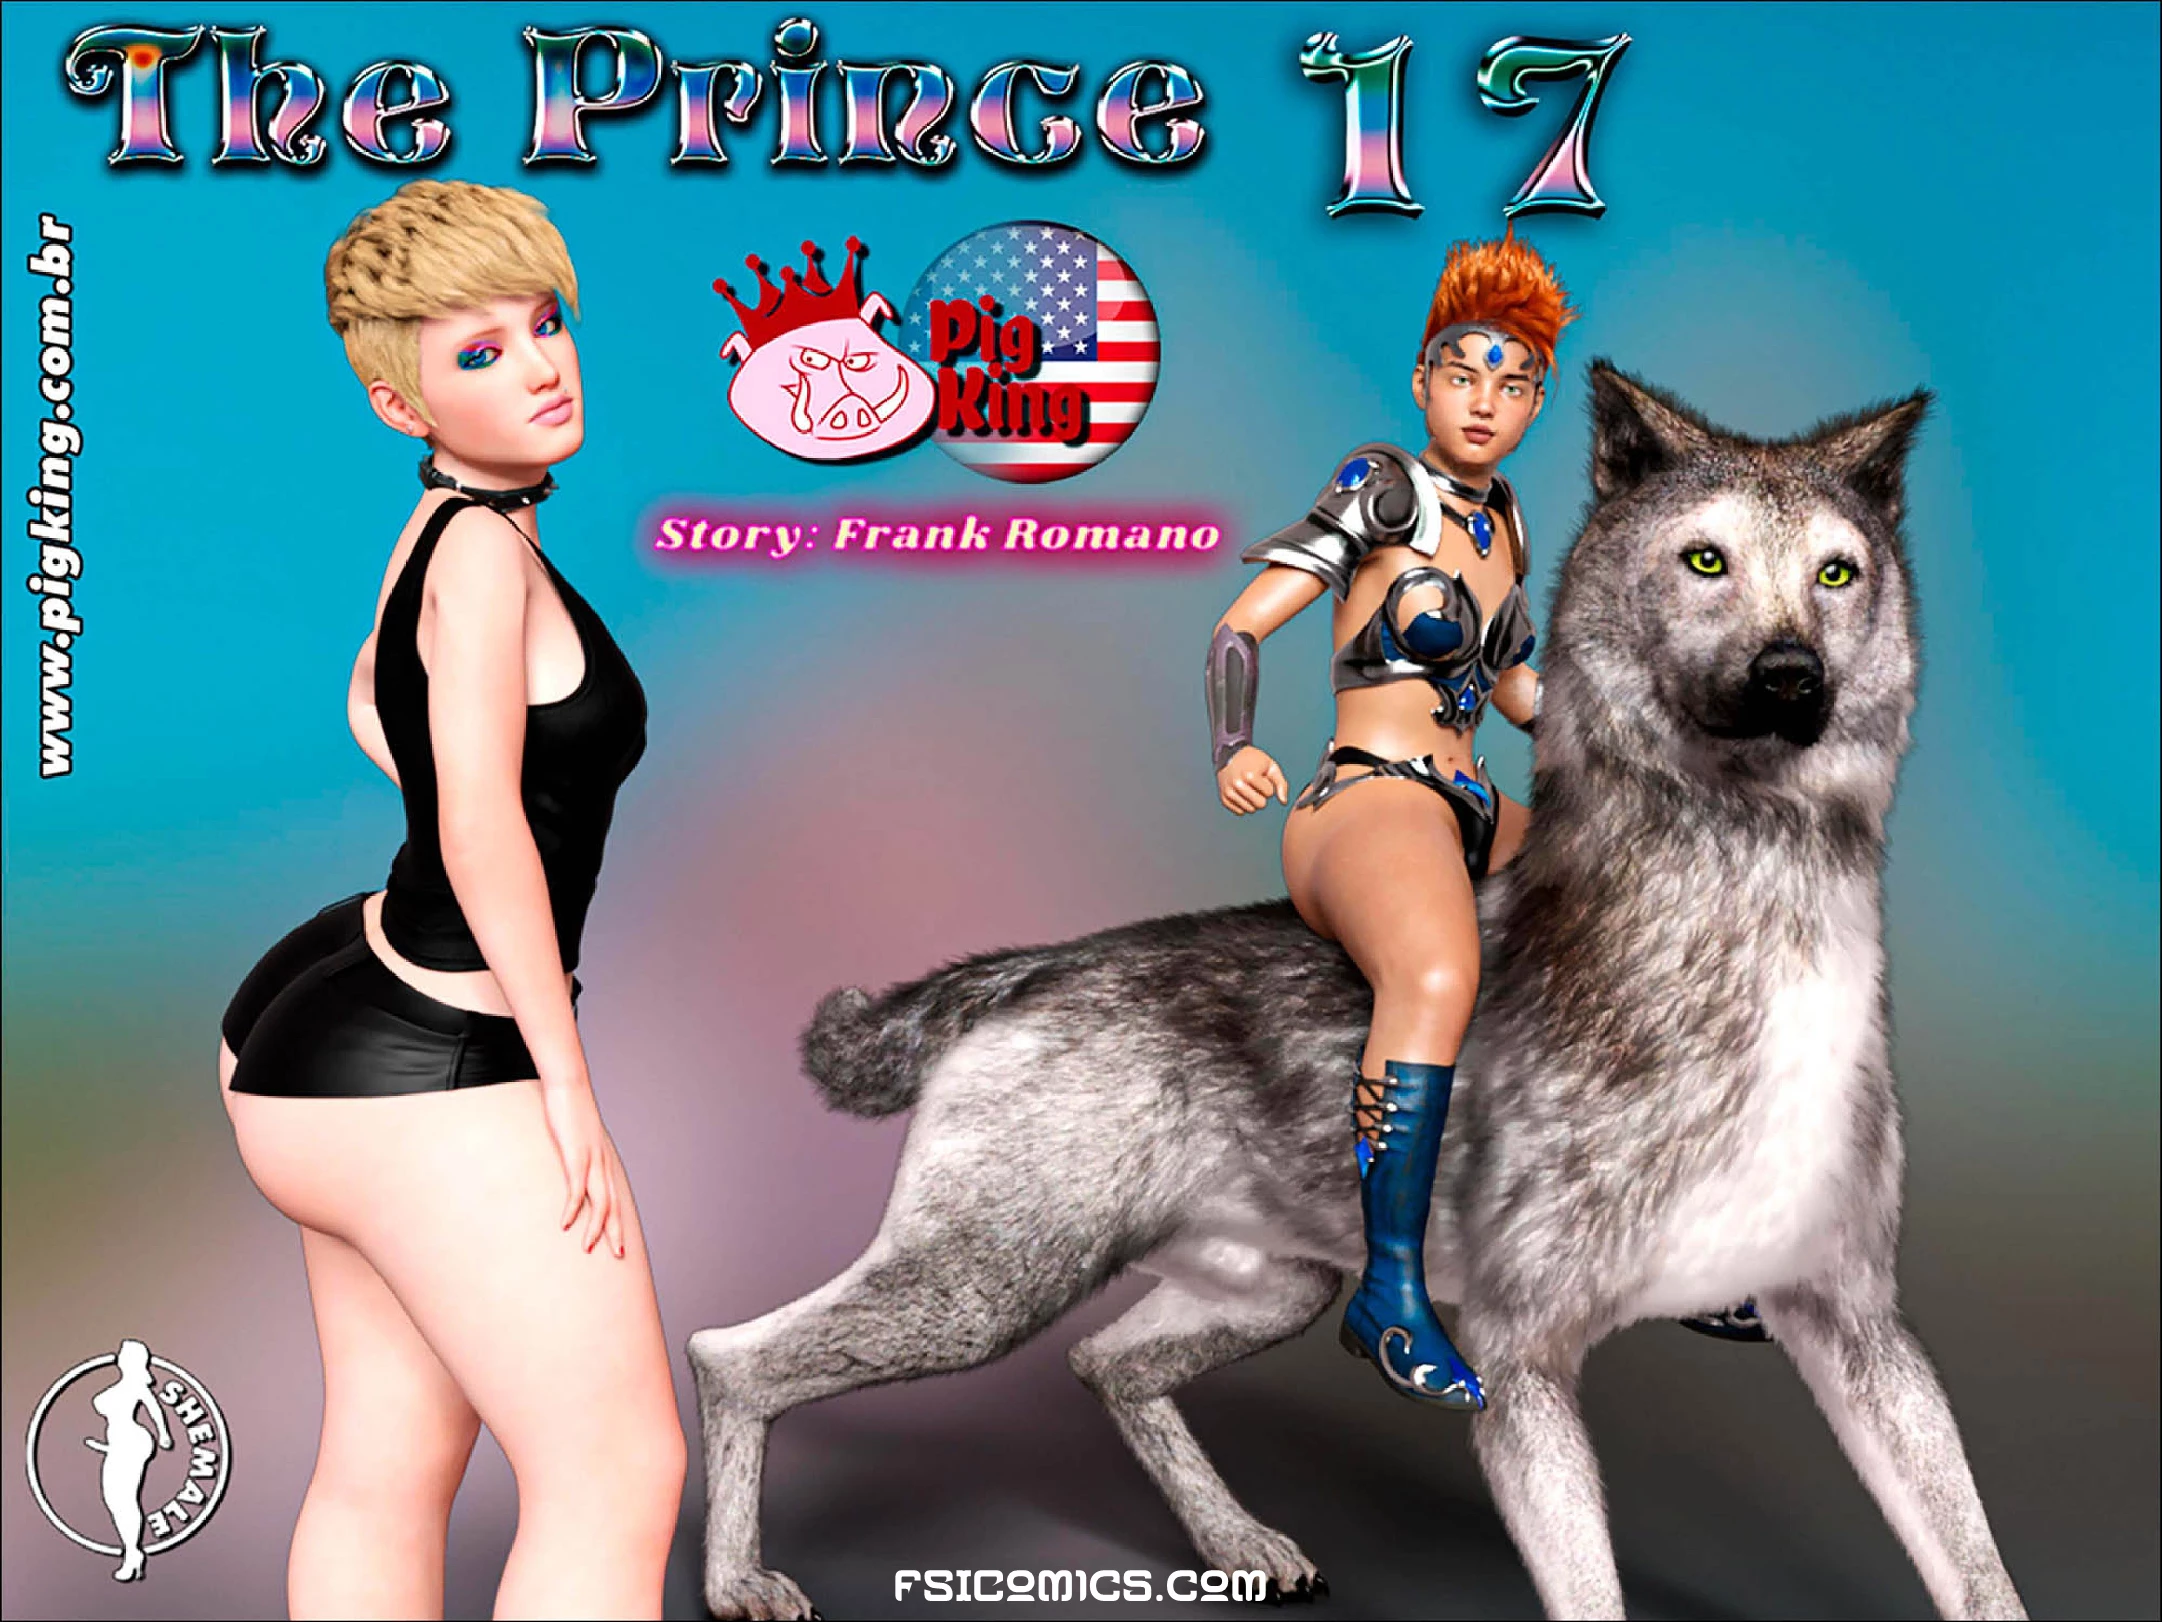 The Prince Chapter 17 – PigKing - 190 - FSIComics